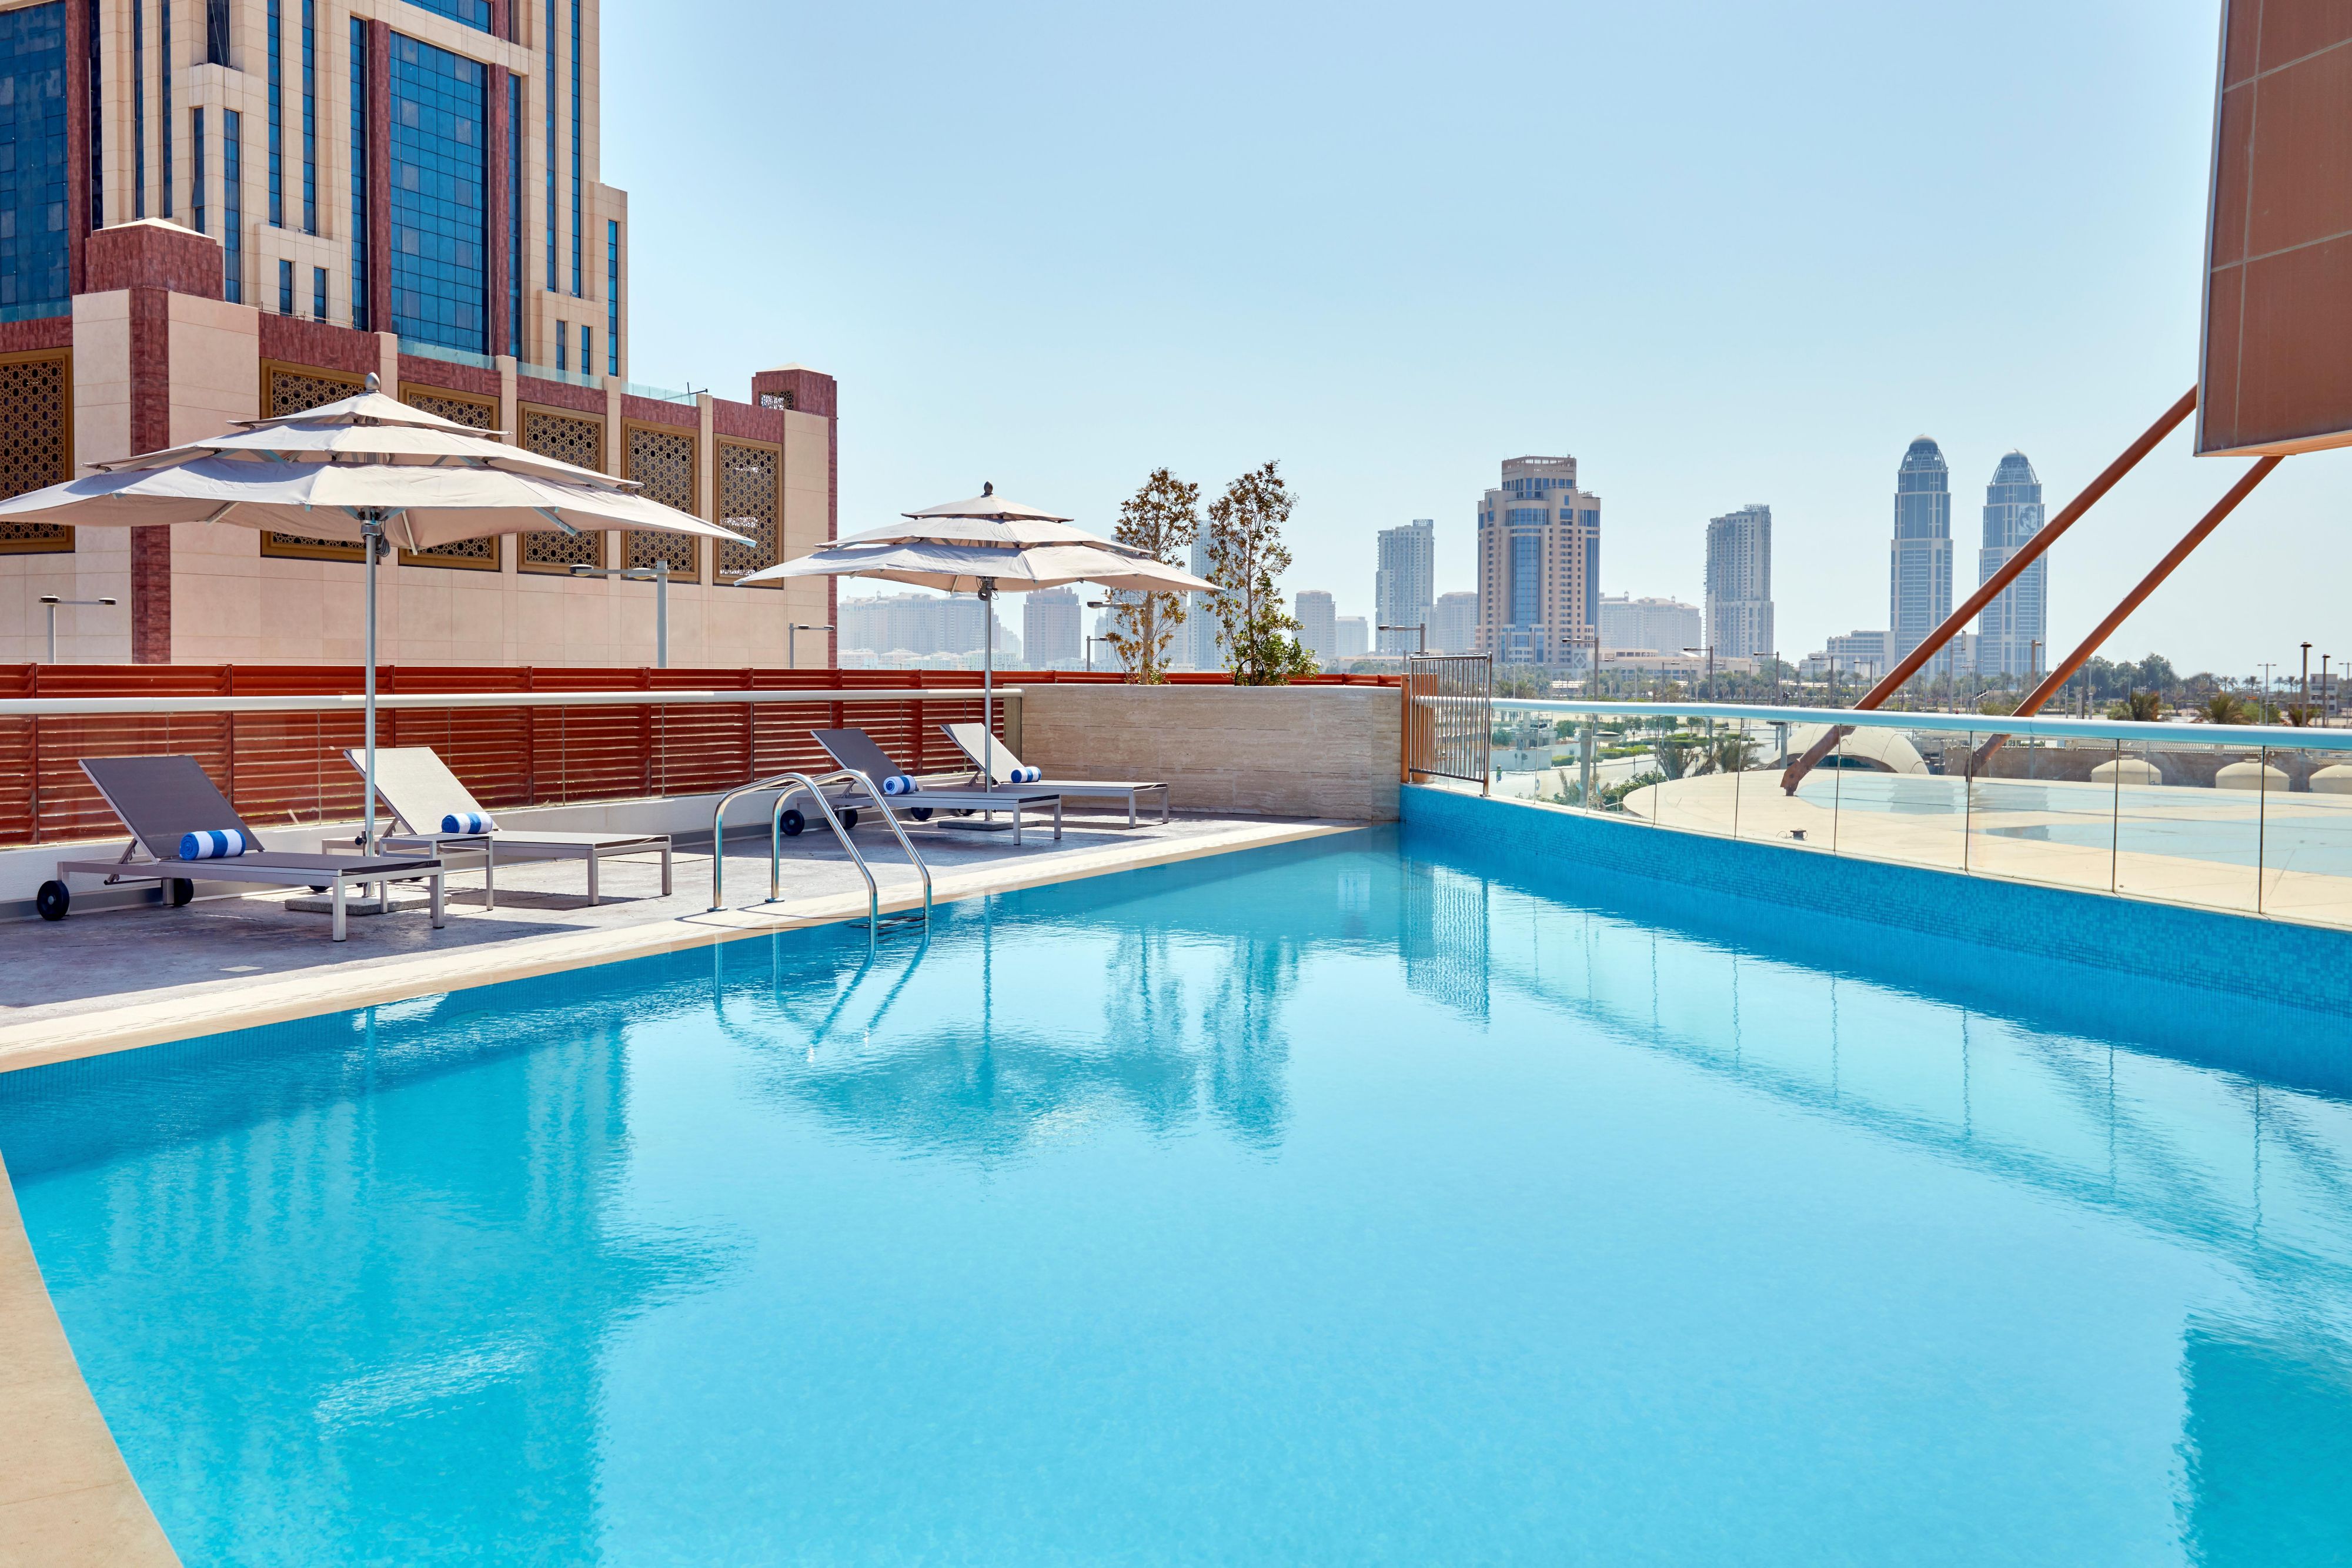 The outdoor pool, located on the 2nd floor, overlooks the beautiful city of Lusail and is accessible to all guests. Book your stay with us now!